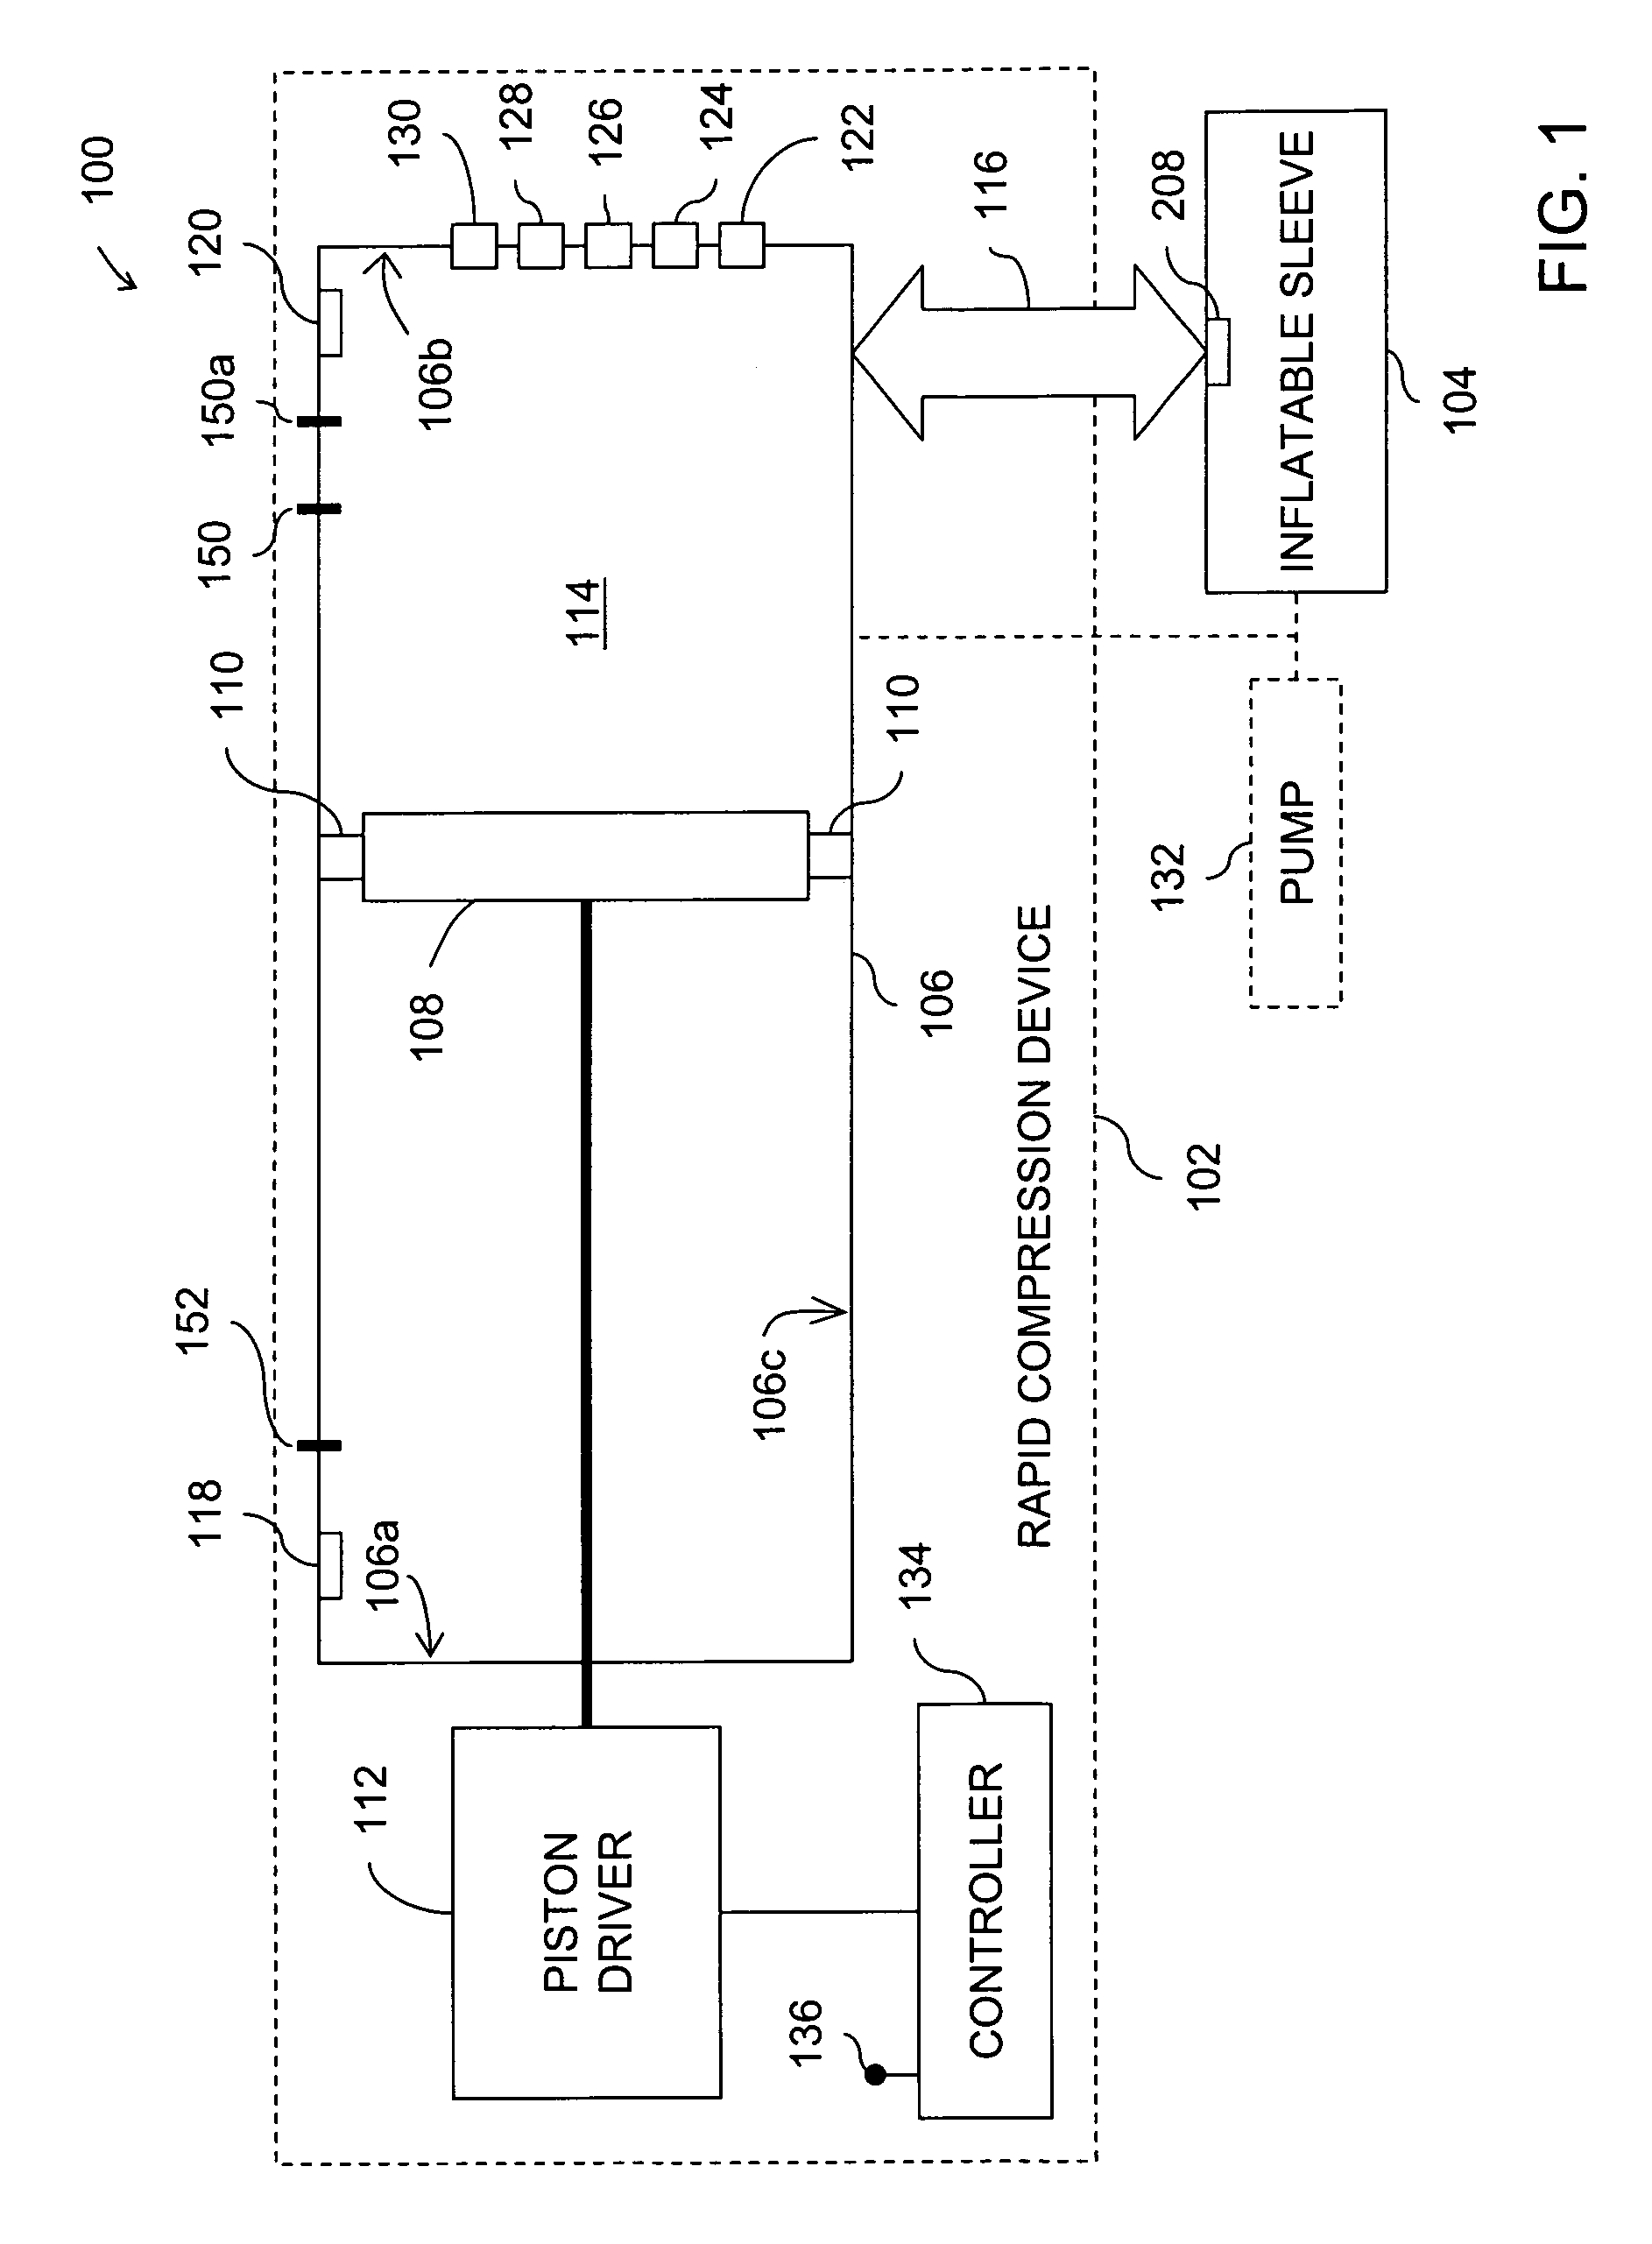 Apparatus and method for providing rapid compression to at least one appendage